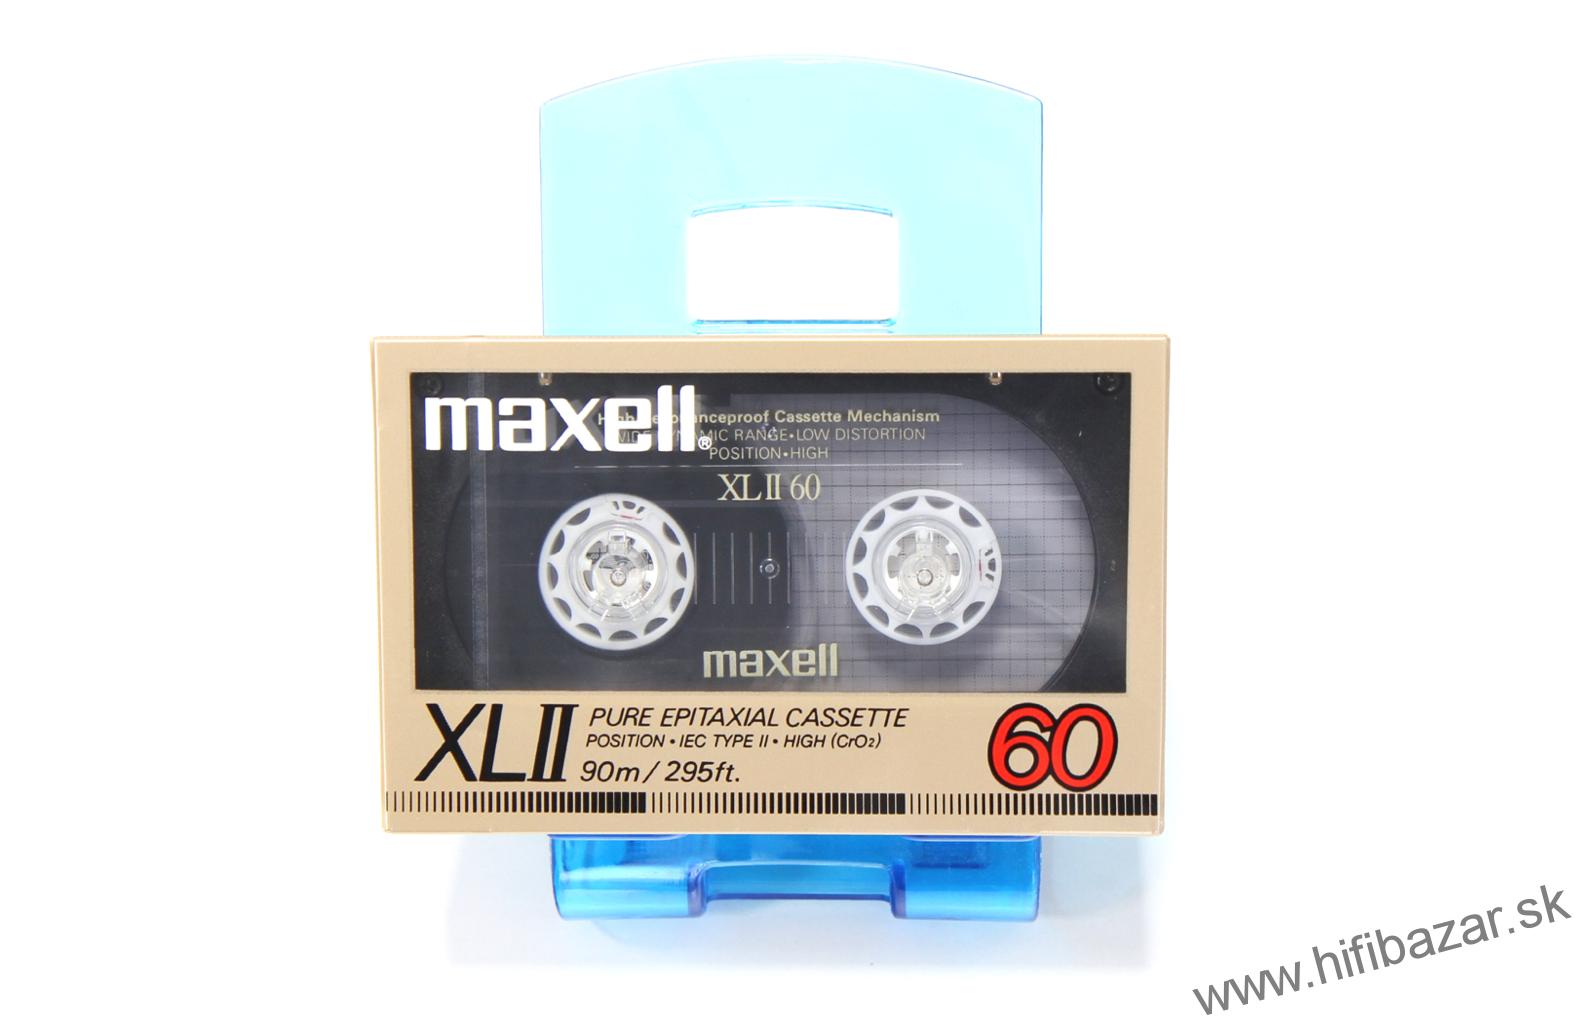 MAXELL XLII-60 Pure Epitaxial